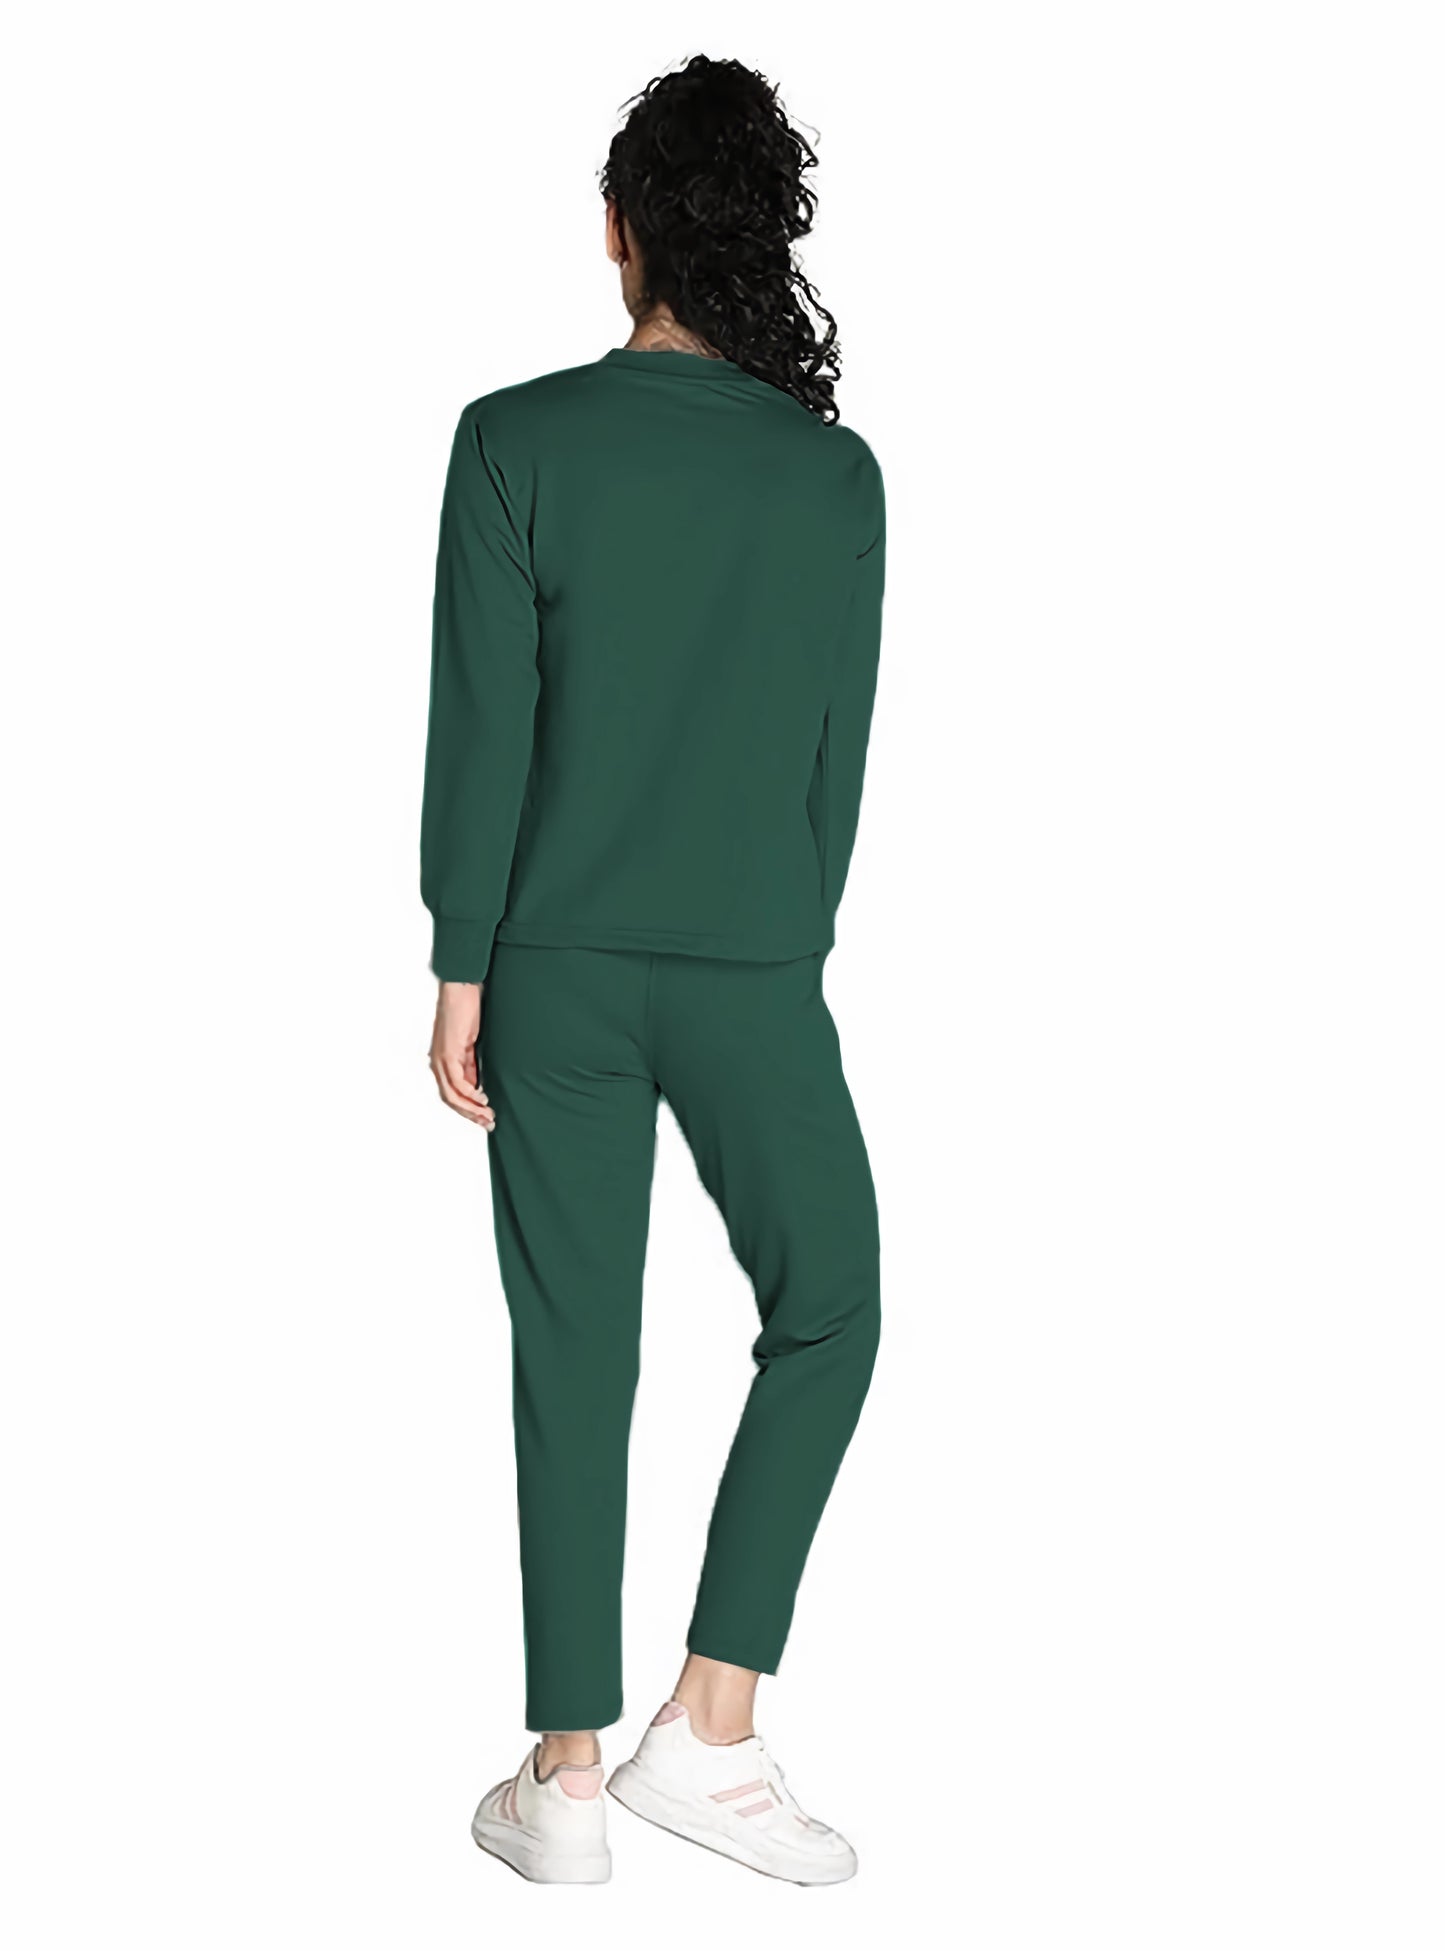 Women Casual Track Suit Co-ord Sets